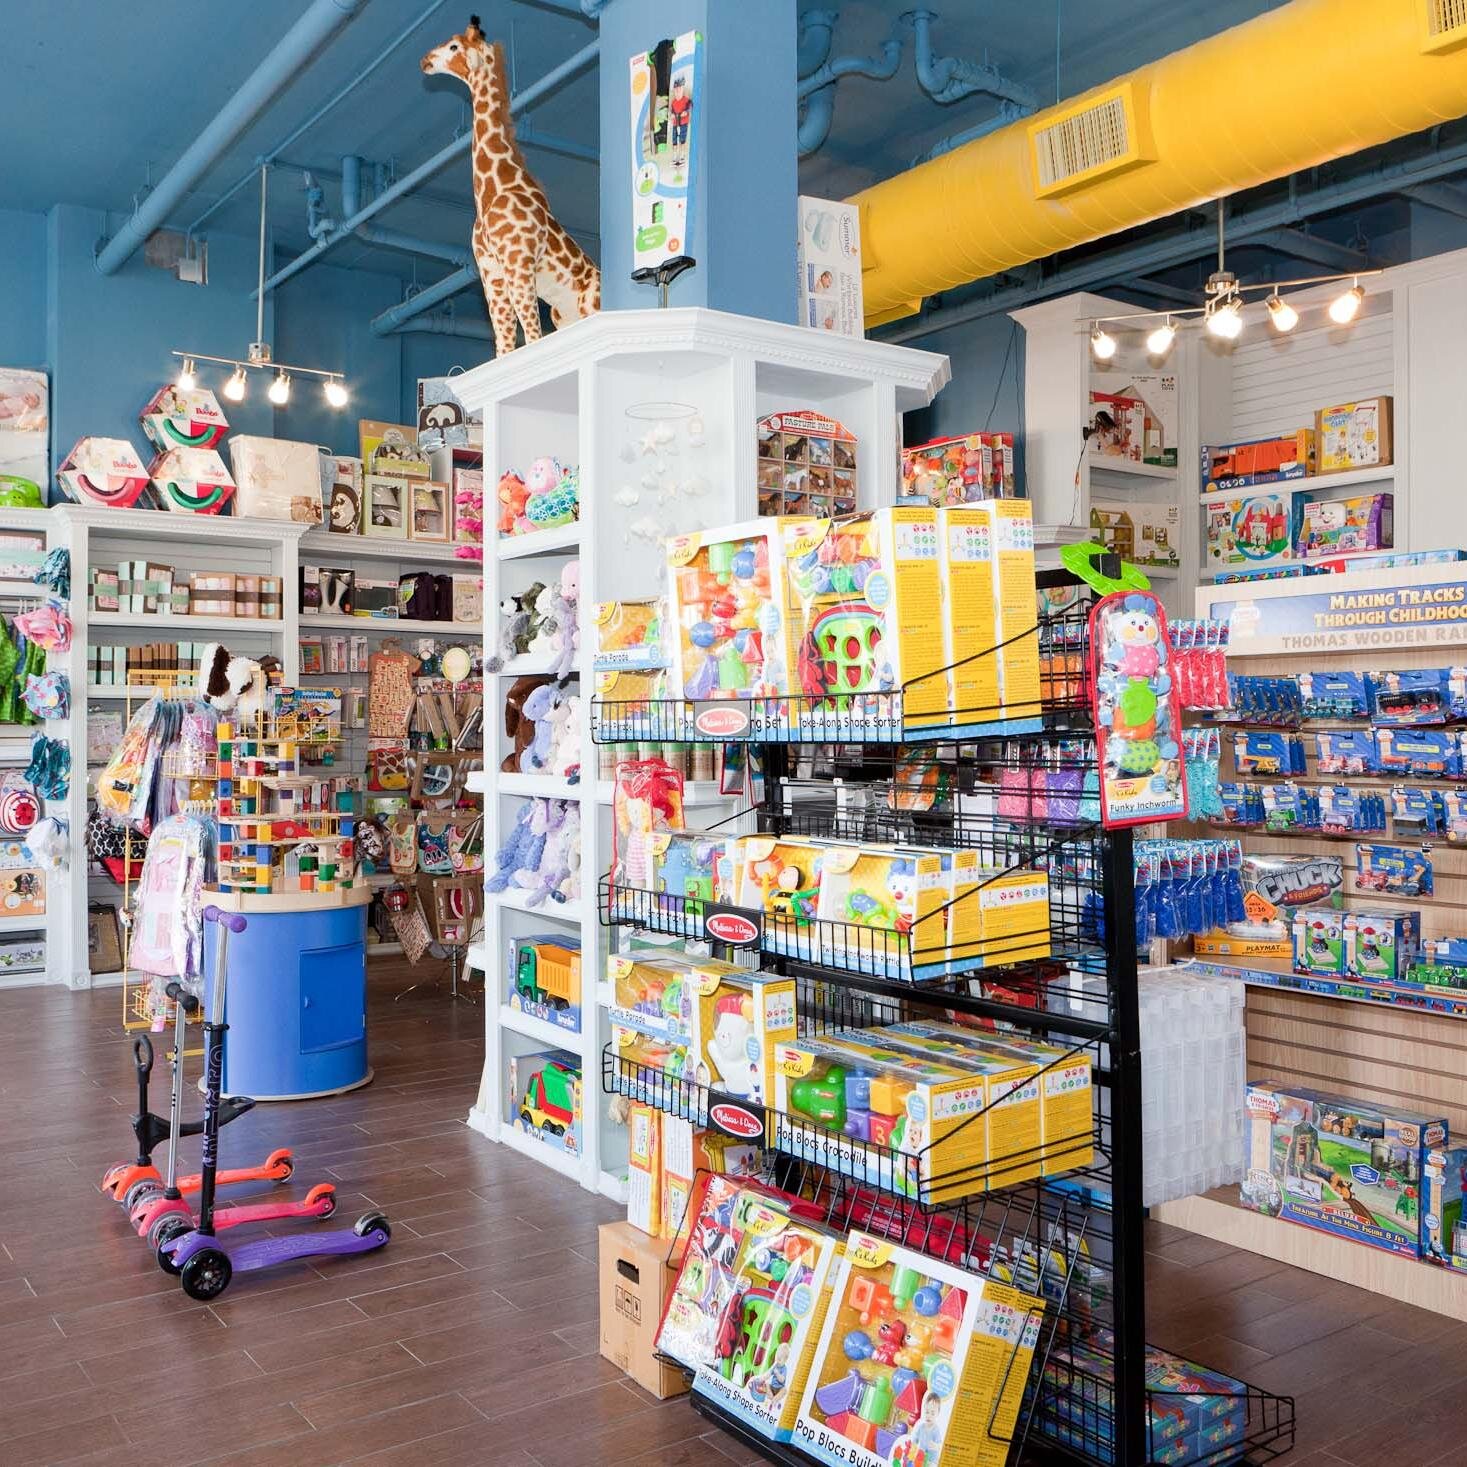 Pipsqueak Children's Shoppe. Brand-new infant and juvenile retail store, Pipsqueak, has opened its doors in Bed-Stuy